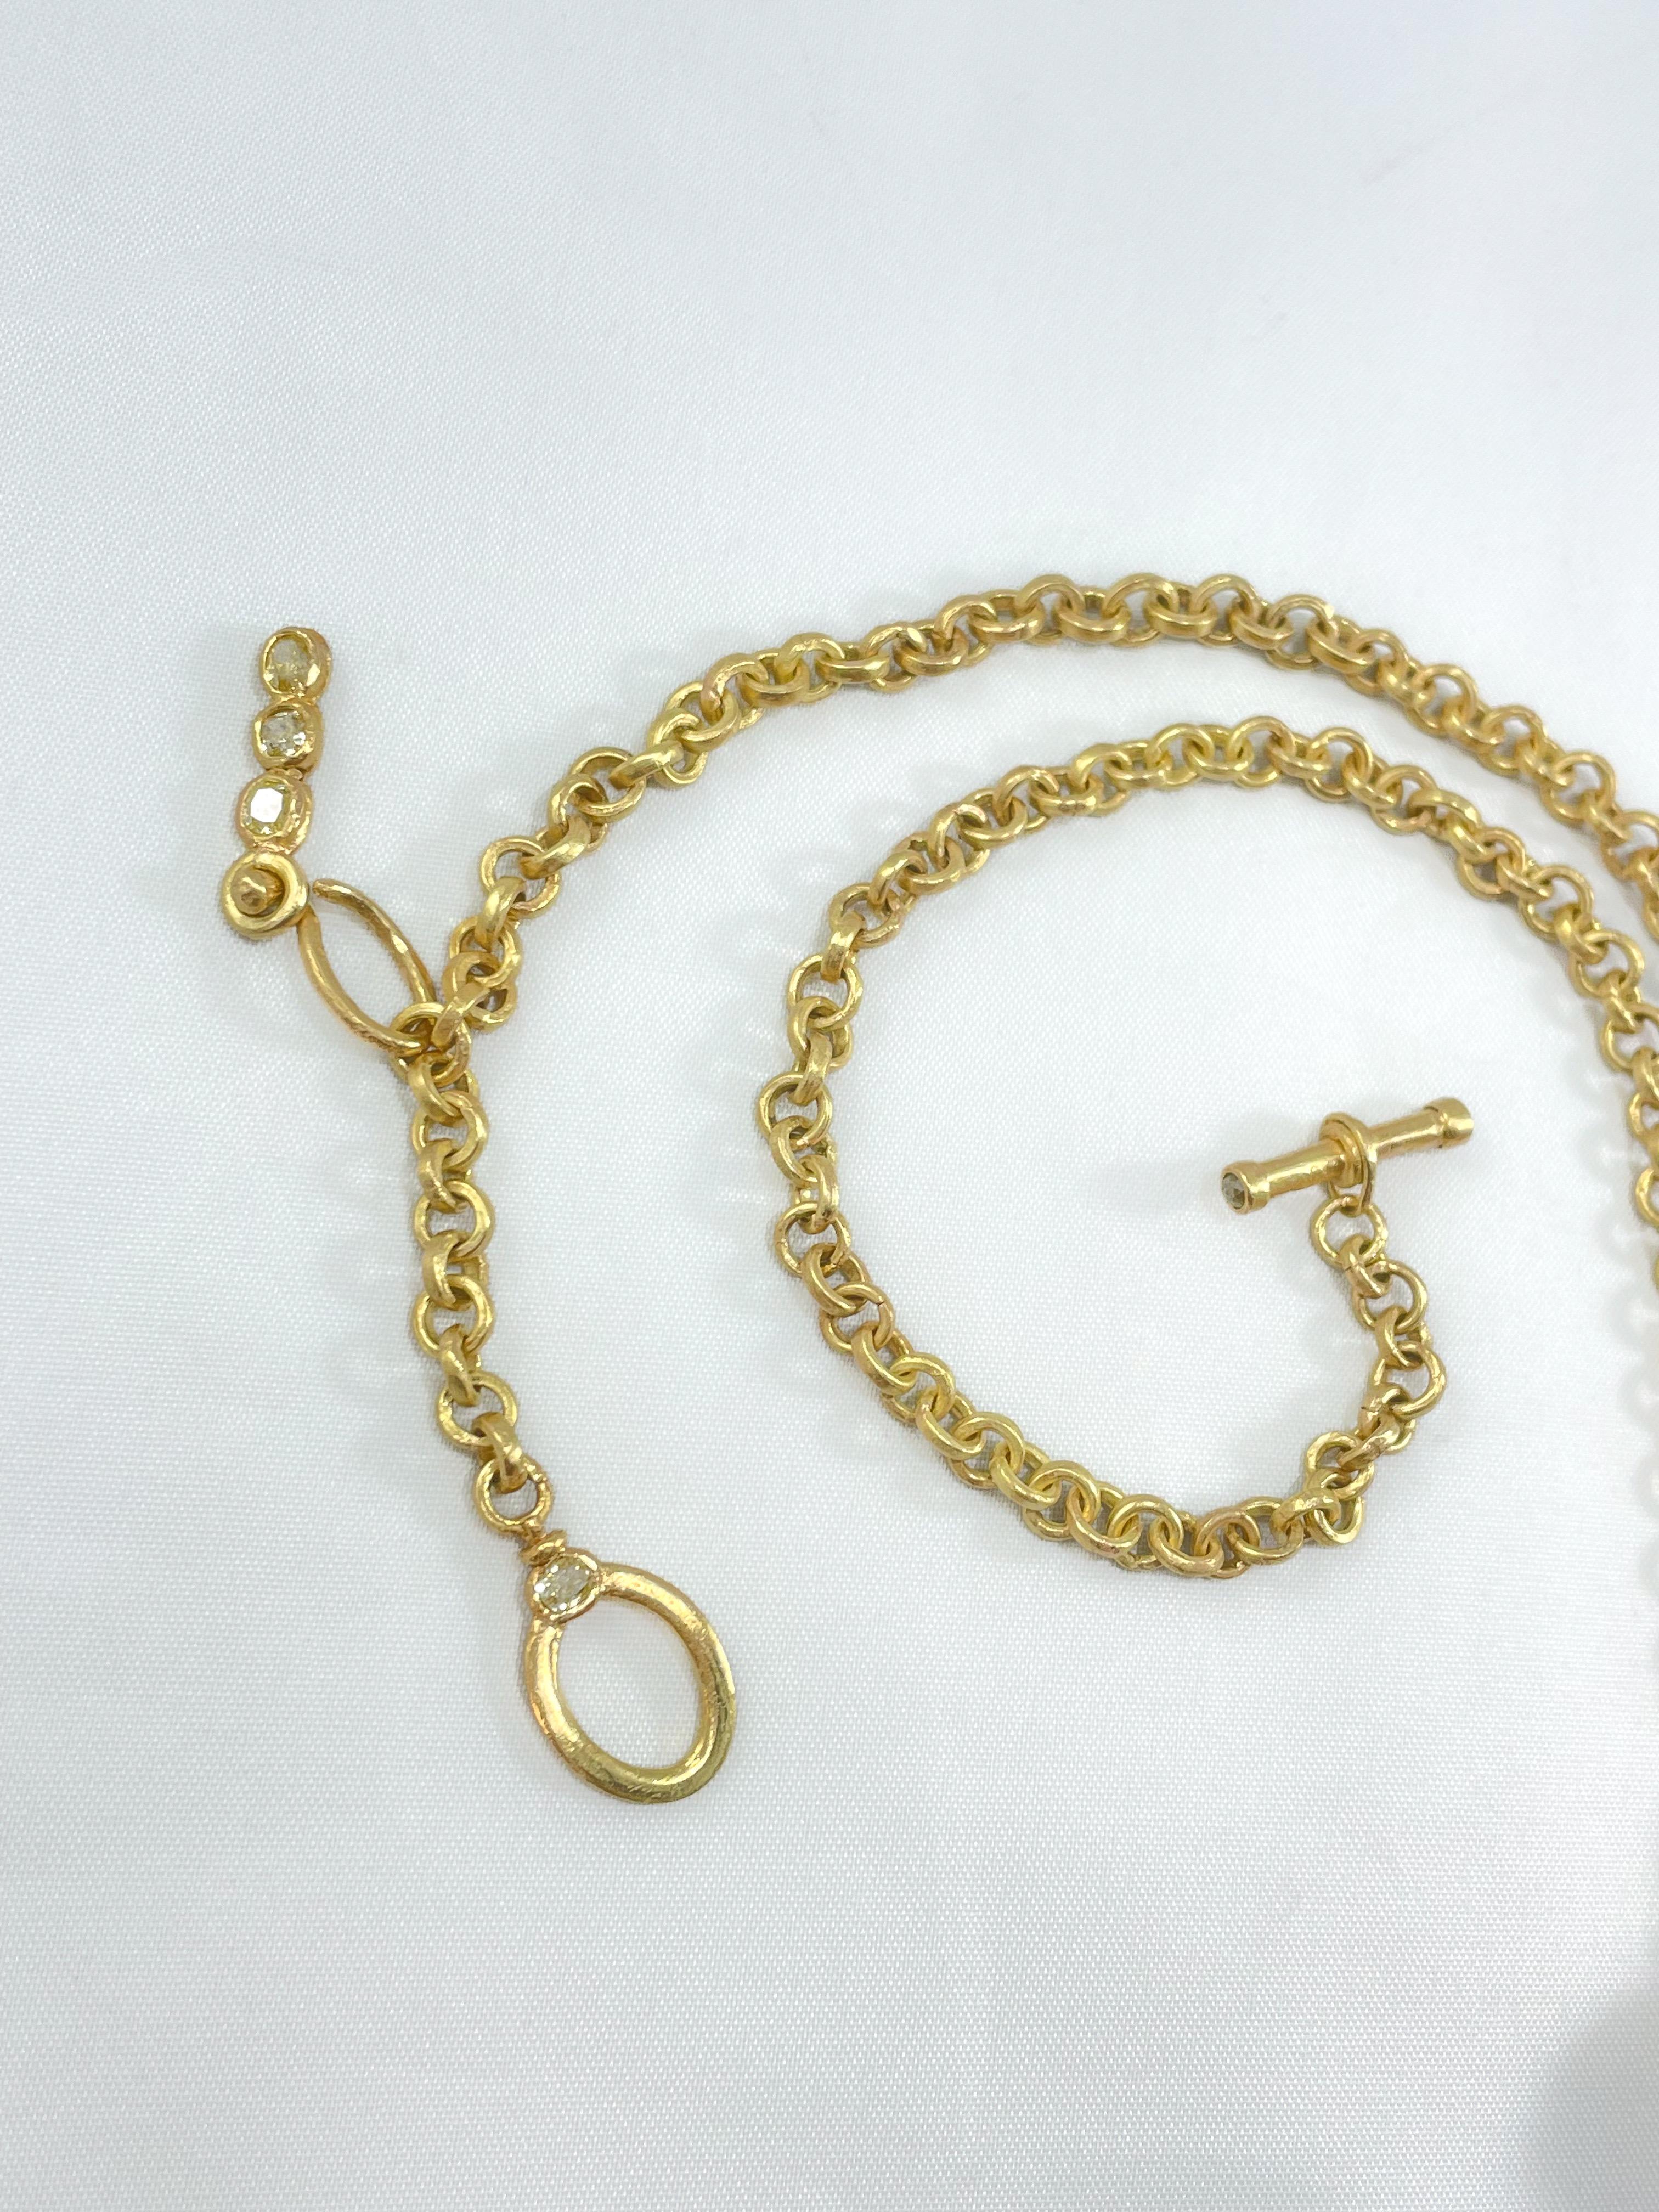 17mm Cream Pearl on 18K Gold Chain Necklace Diamond Enhancer and Toggle Clasp For Sale 10